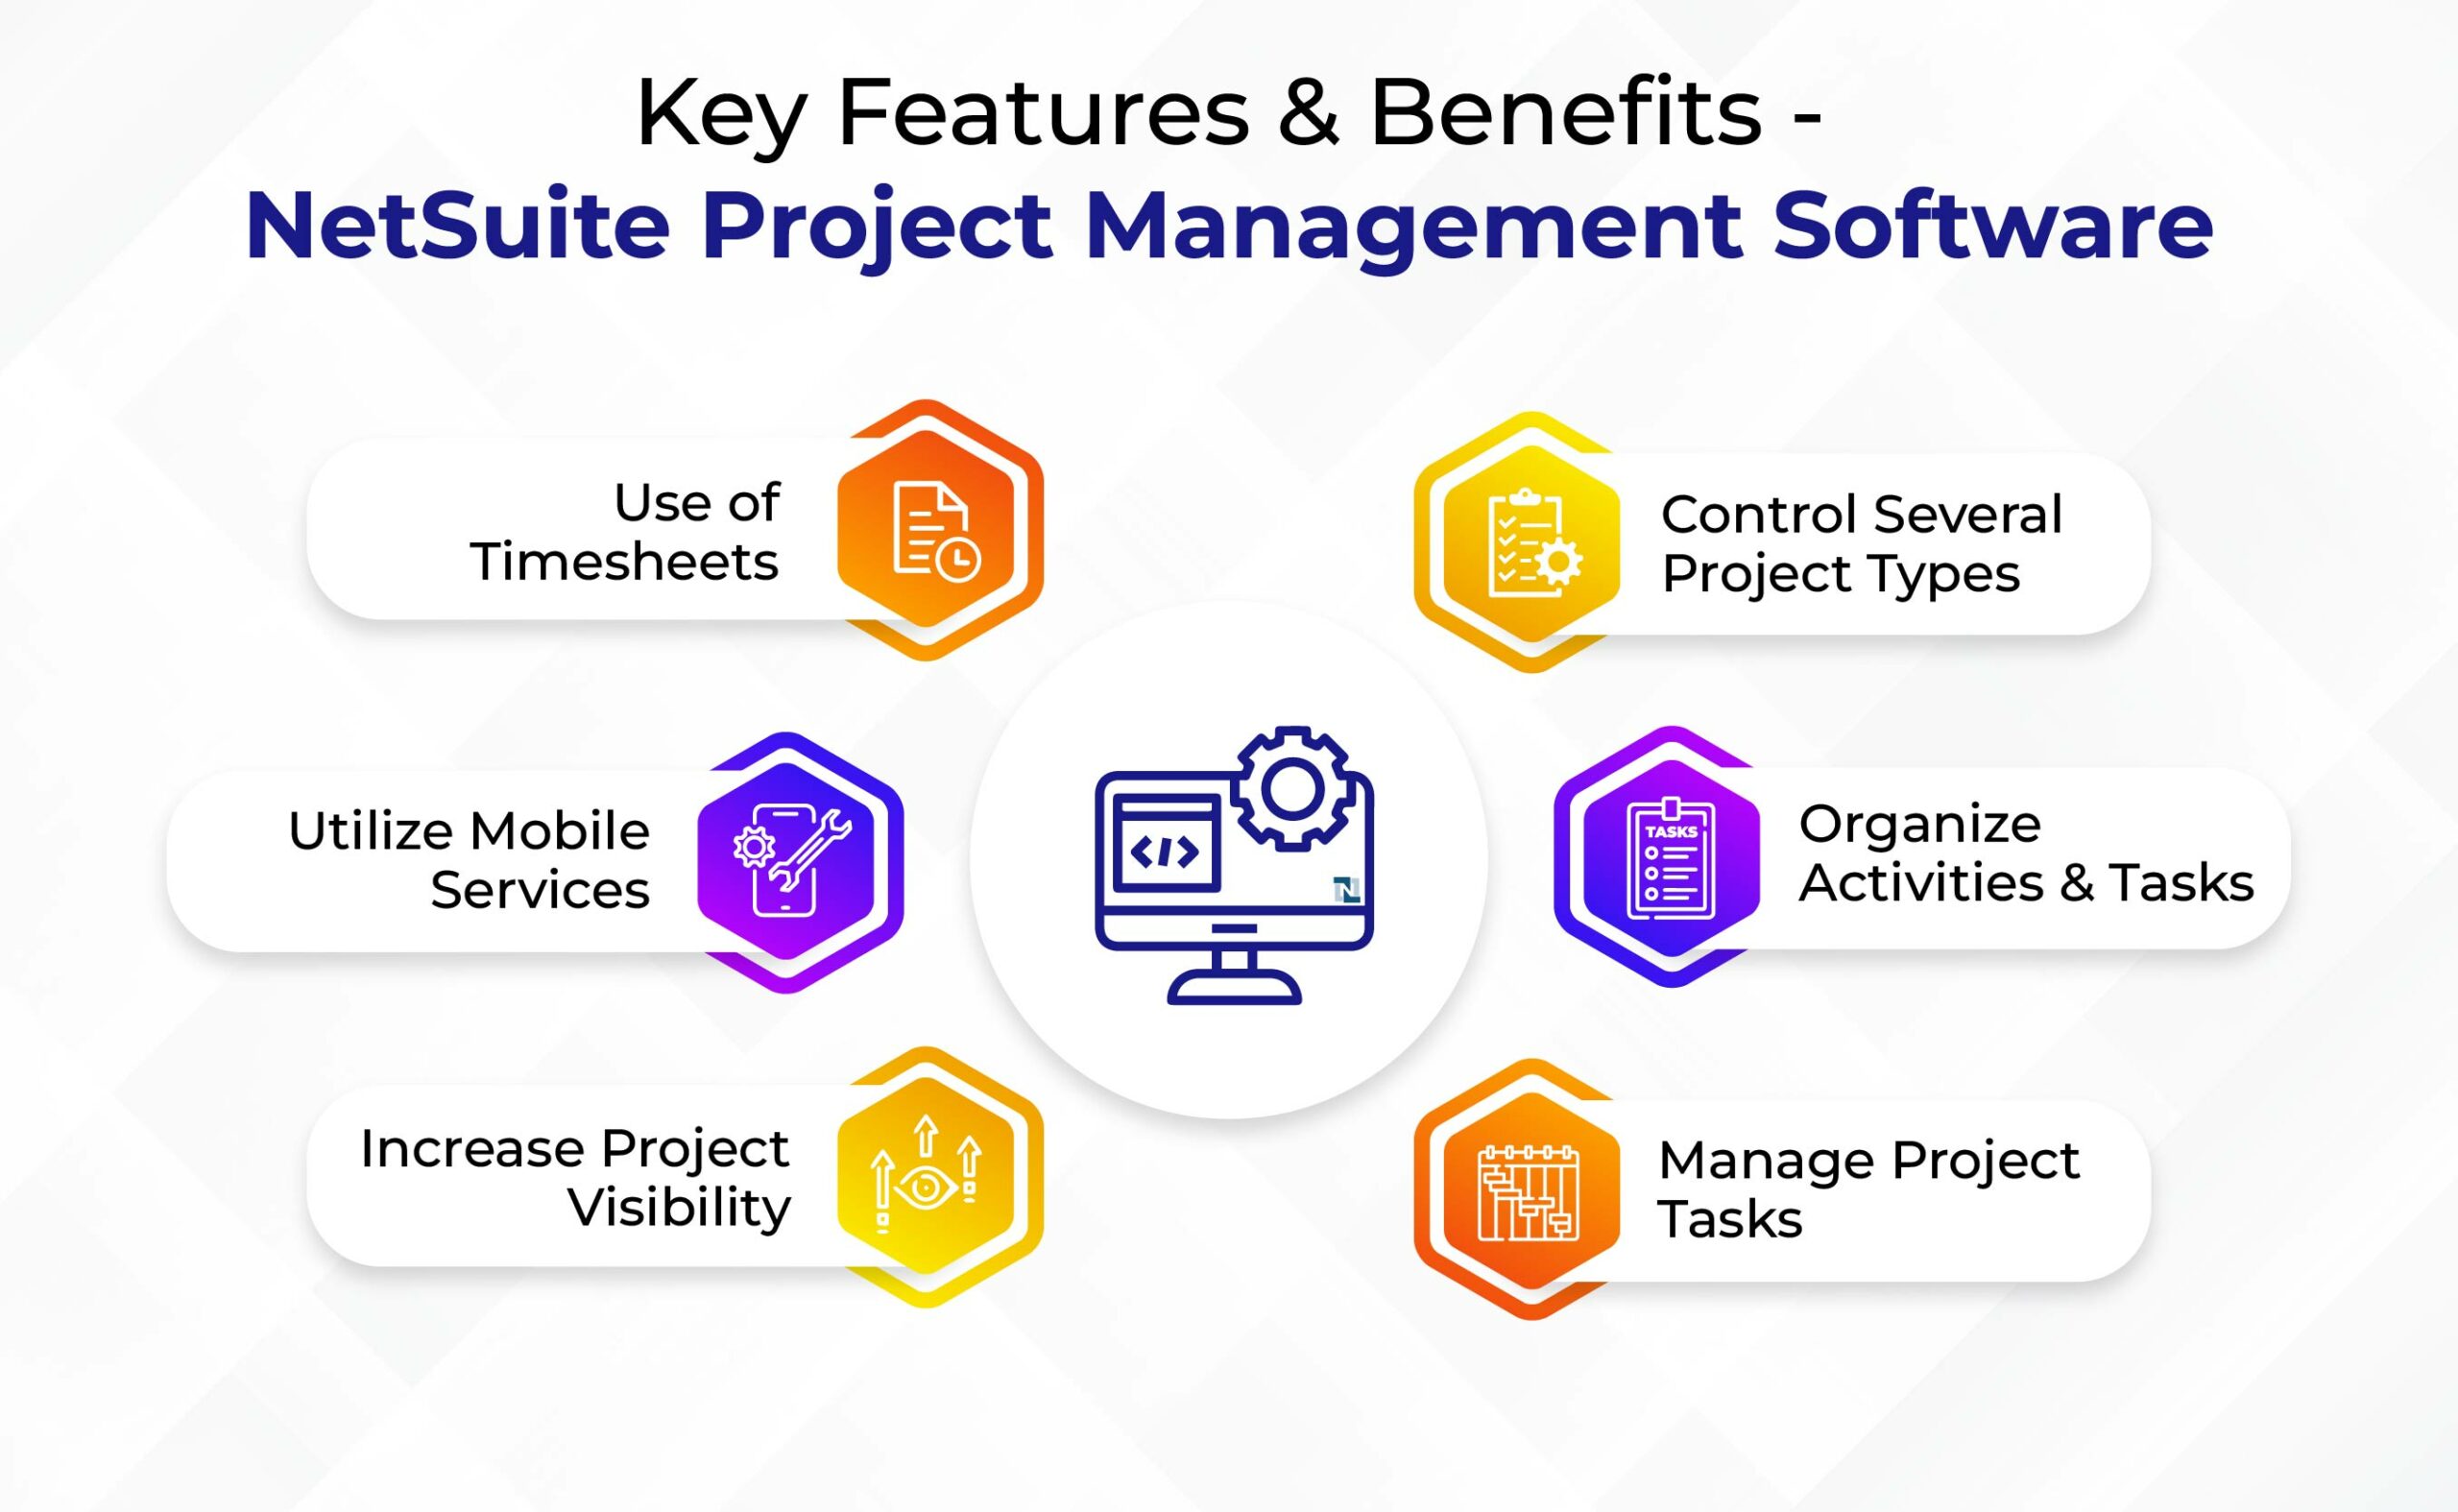 Key Features & Benefits - NetSuite Project Management software